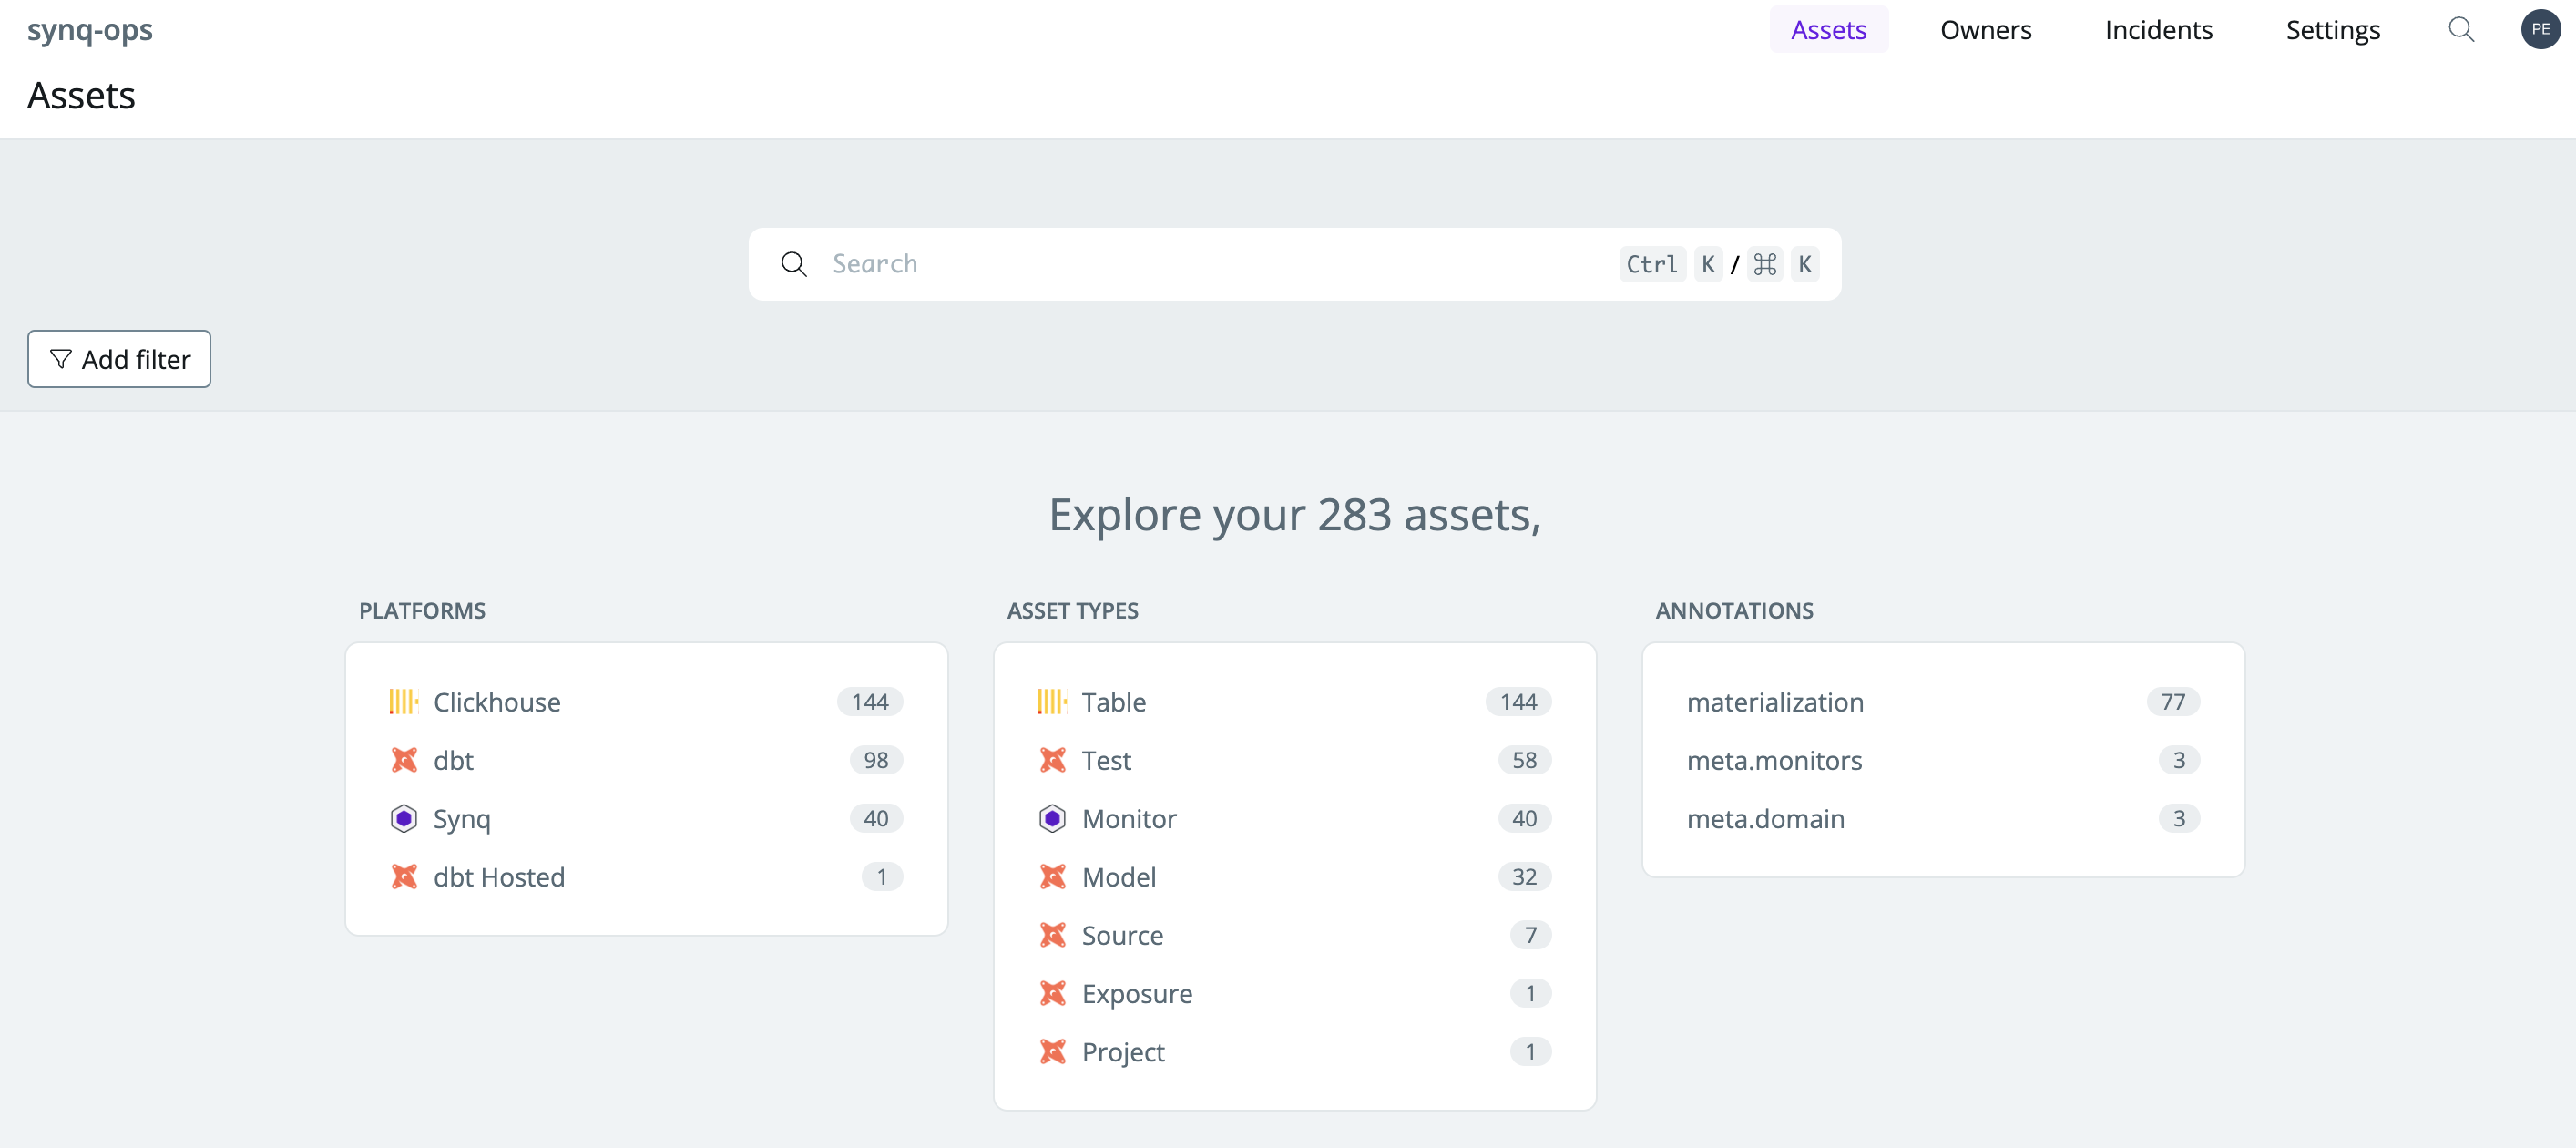 Assets Overview